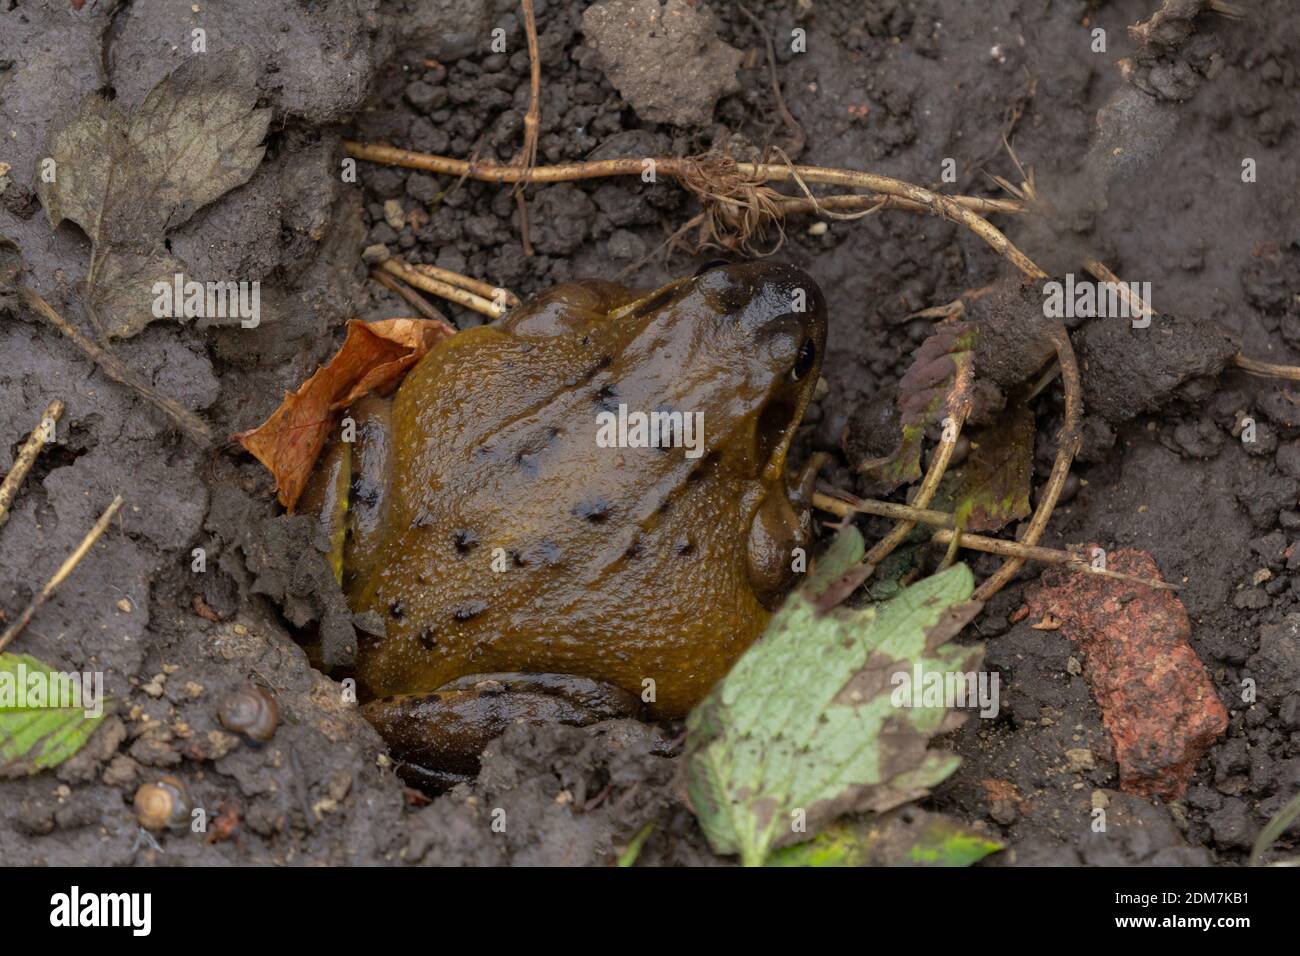 A common toad (UK), bufo bufo, getting ready to hibernate in soil in a Yorkshire garden, England. Stock Photo